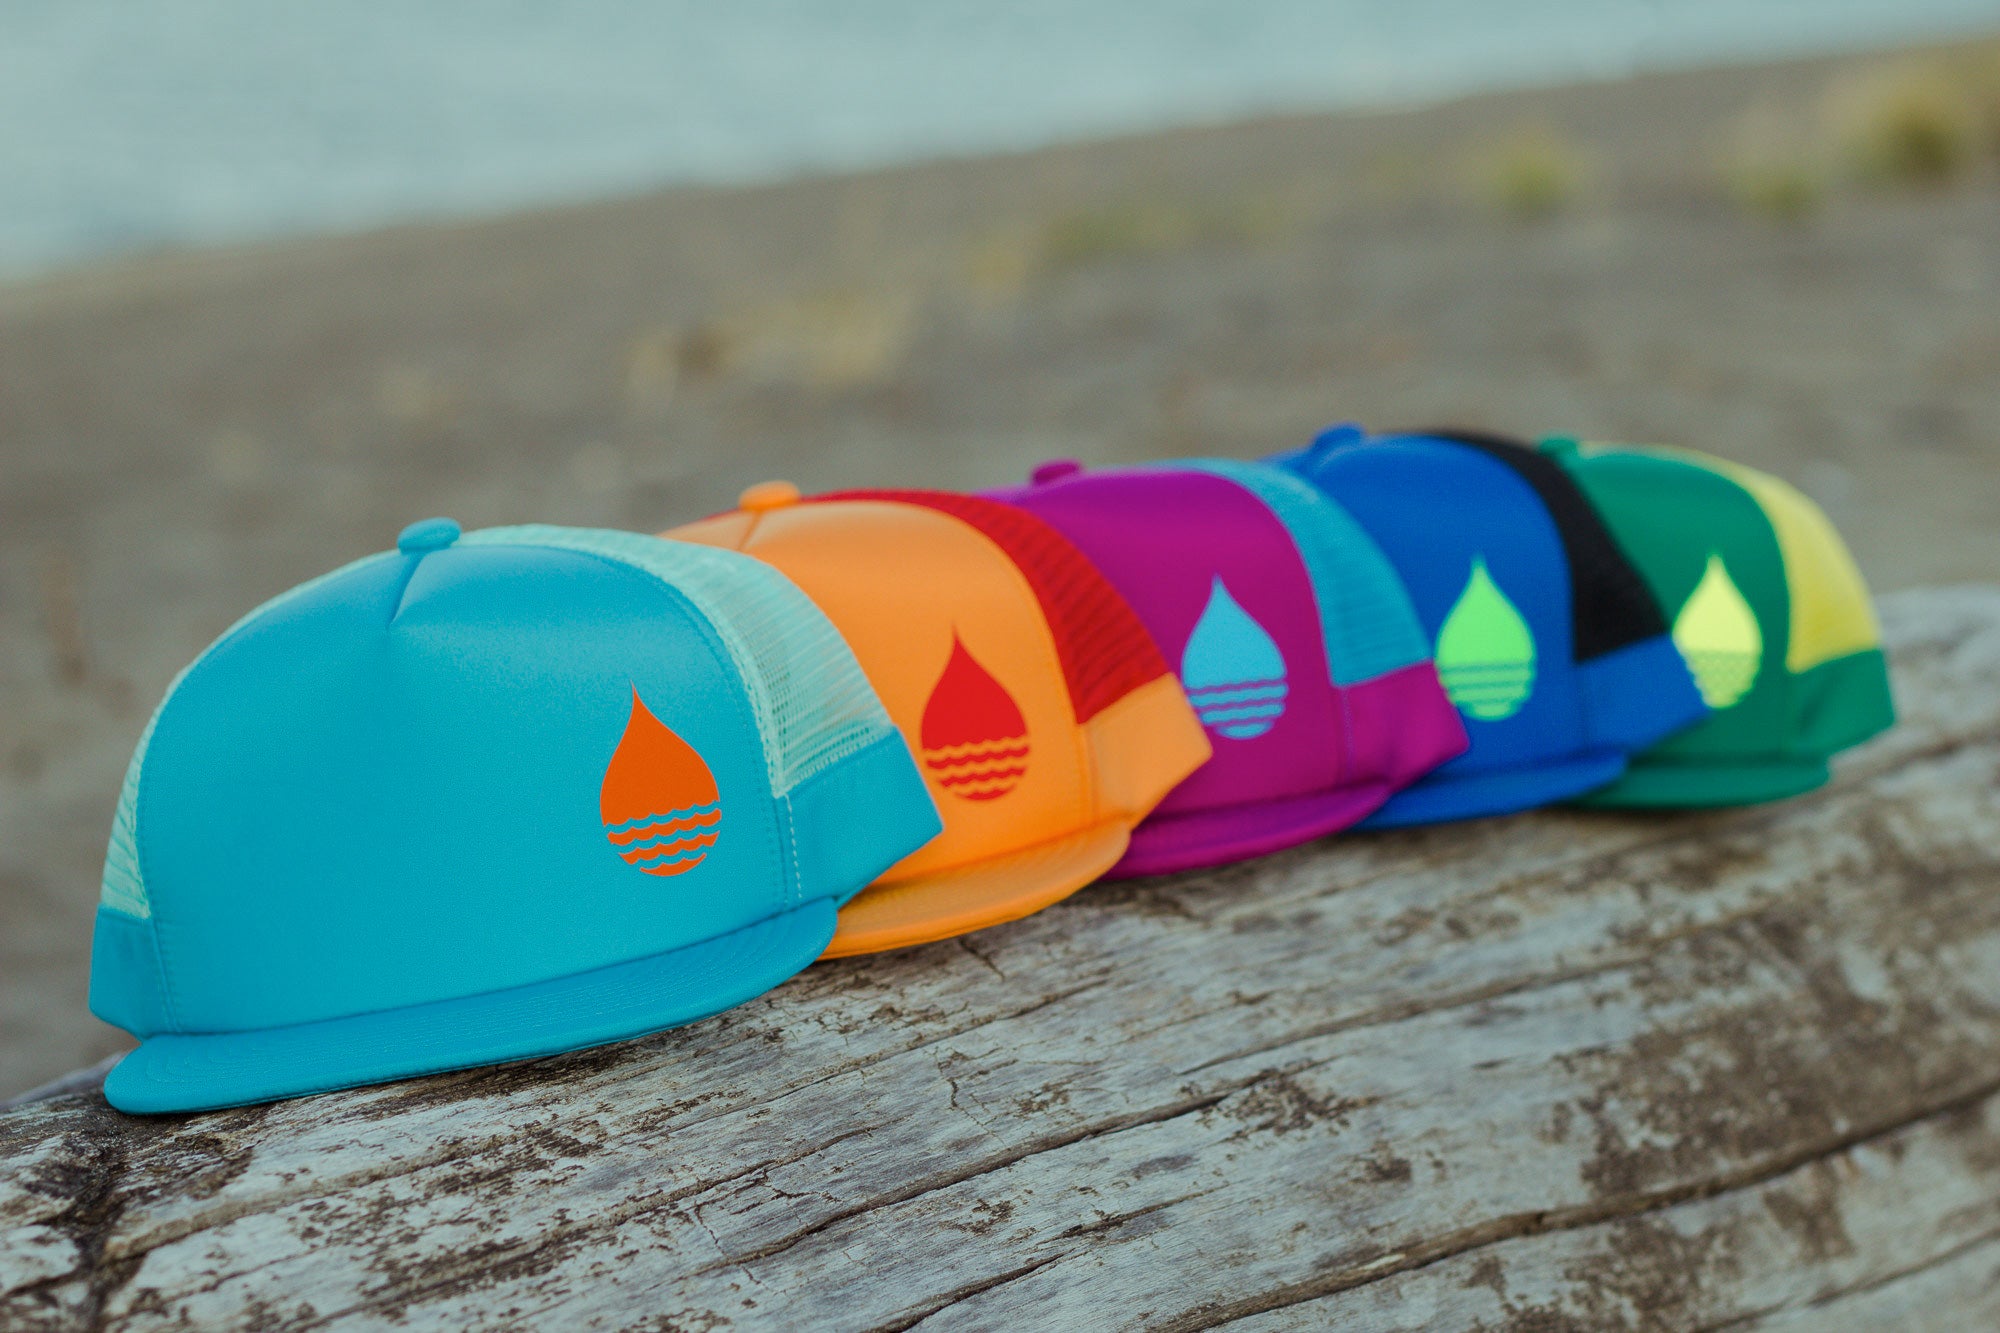 BUOY WEAR's new floating hat collection on the beach